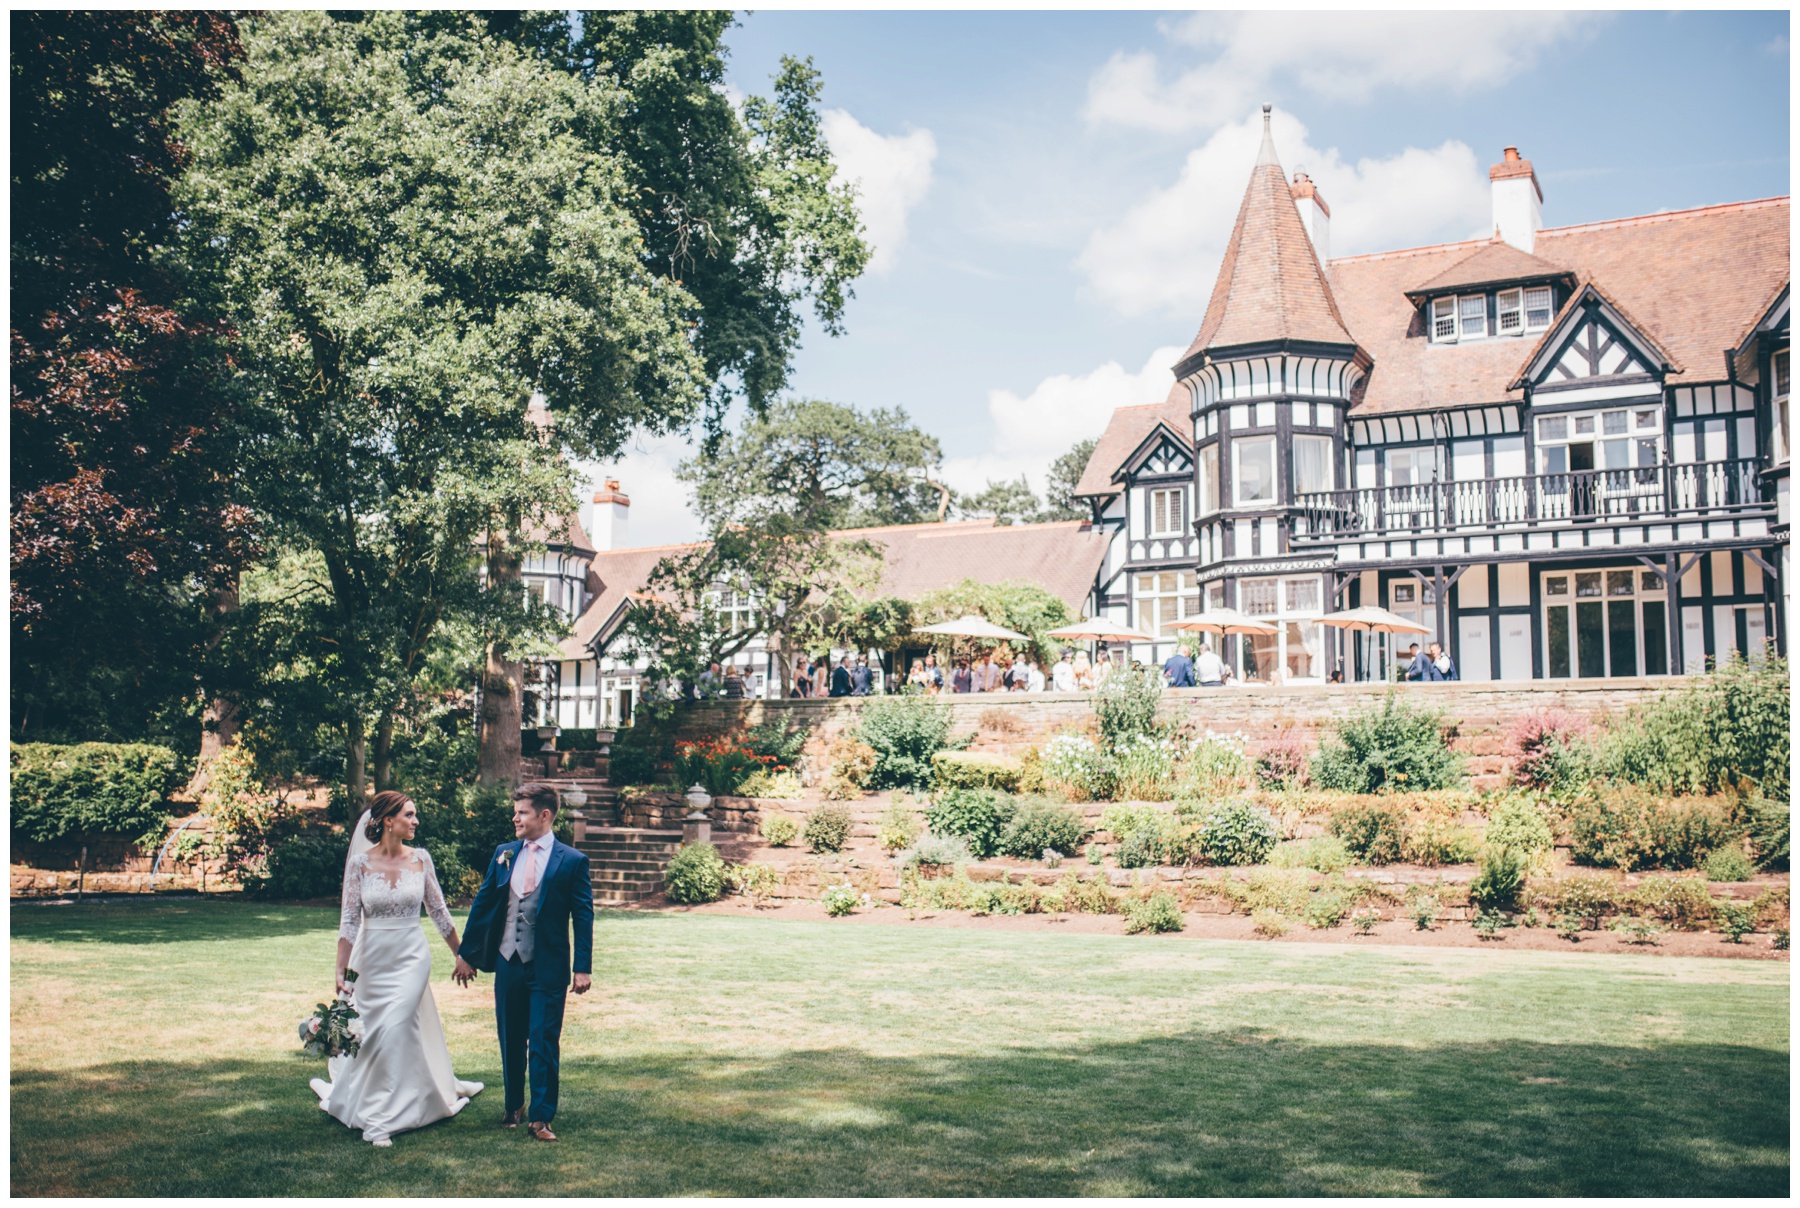 Newlyweds stroll across the beautiful grounds at Tilstone House in Tarporley.